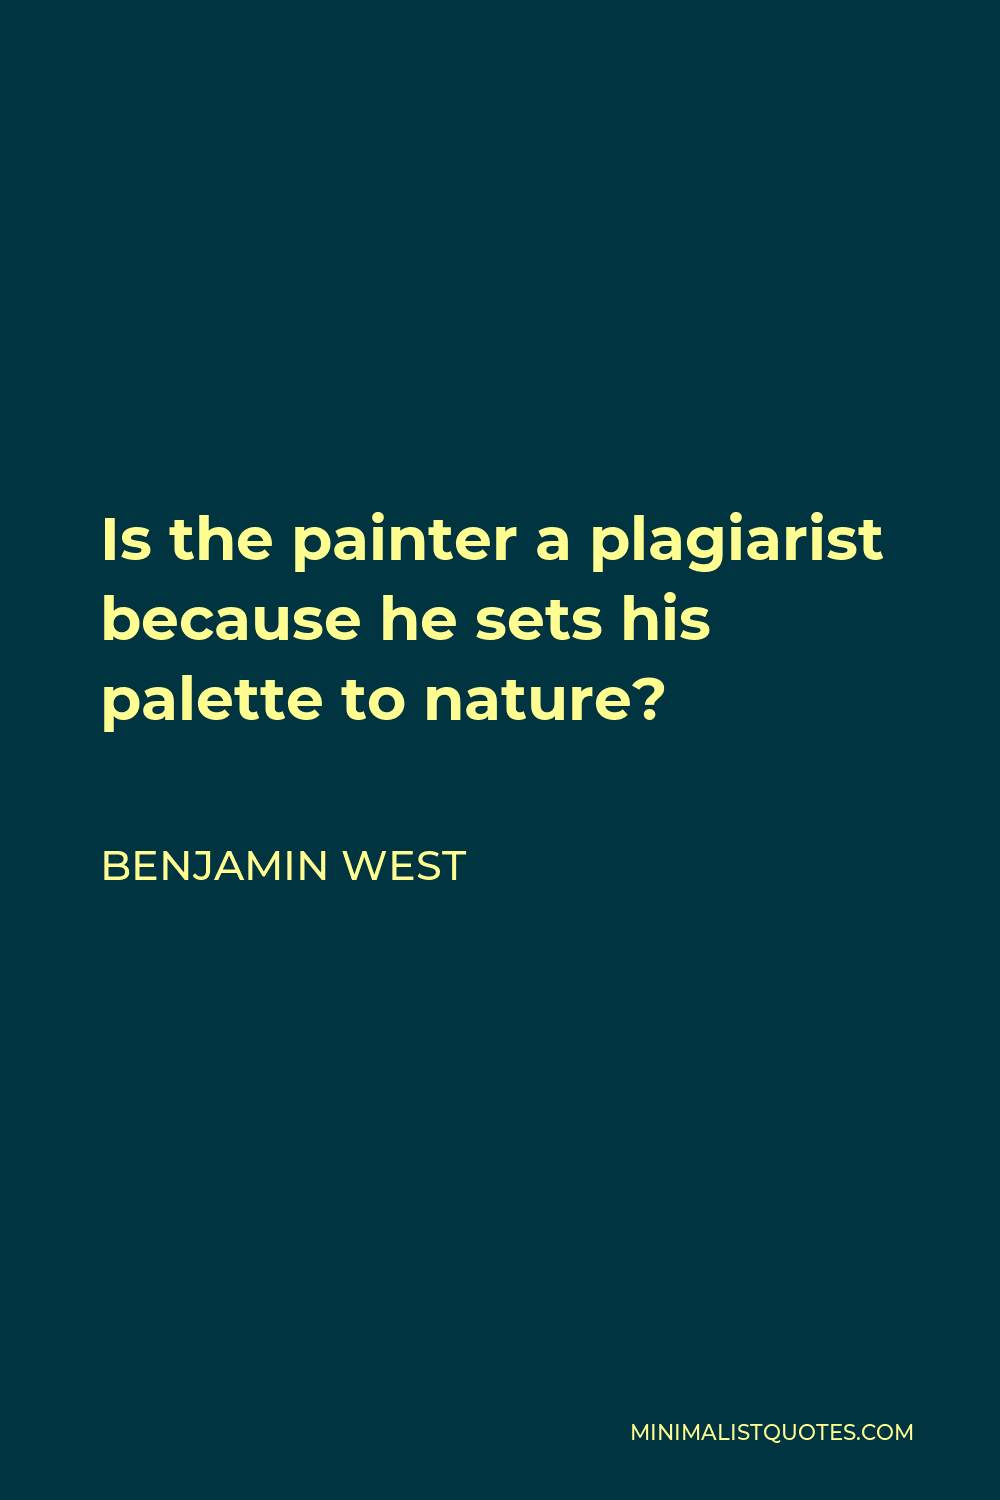 Benjamin West Quote - Is the painter a plagiarist because he sets his palette to nature?